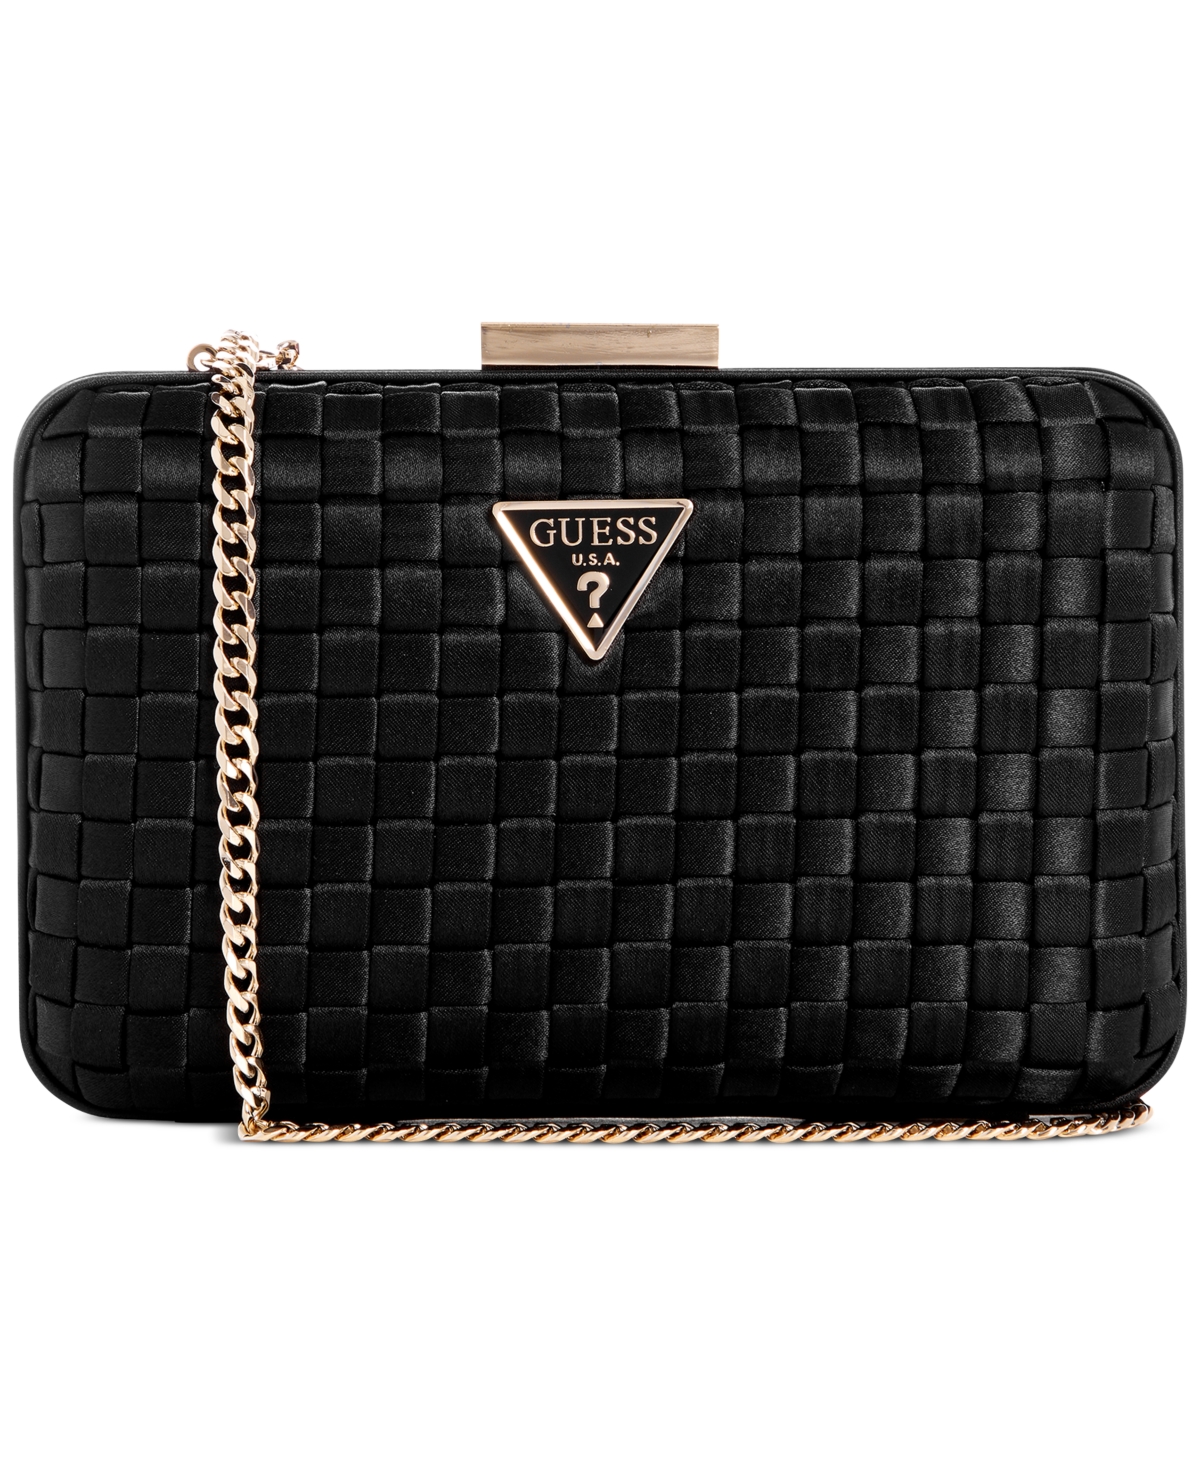 Guess Twiller Minaudiere Satin Small Crossbody In Black